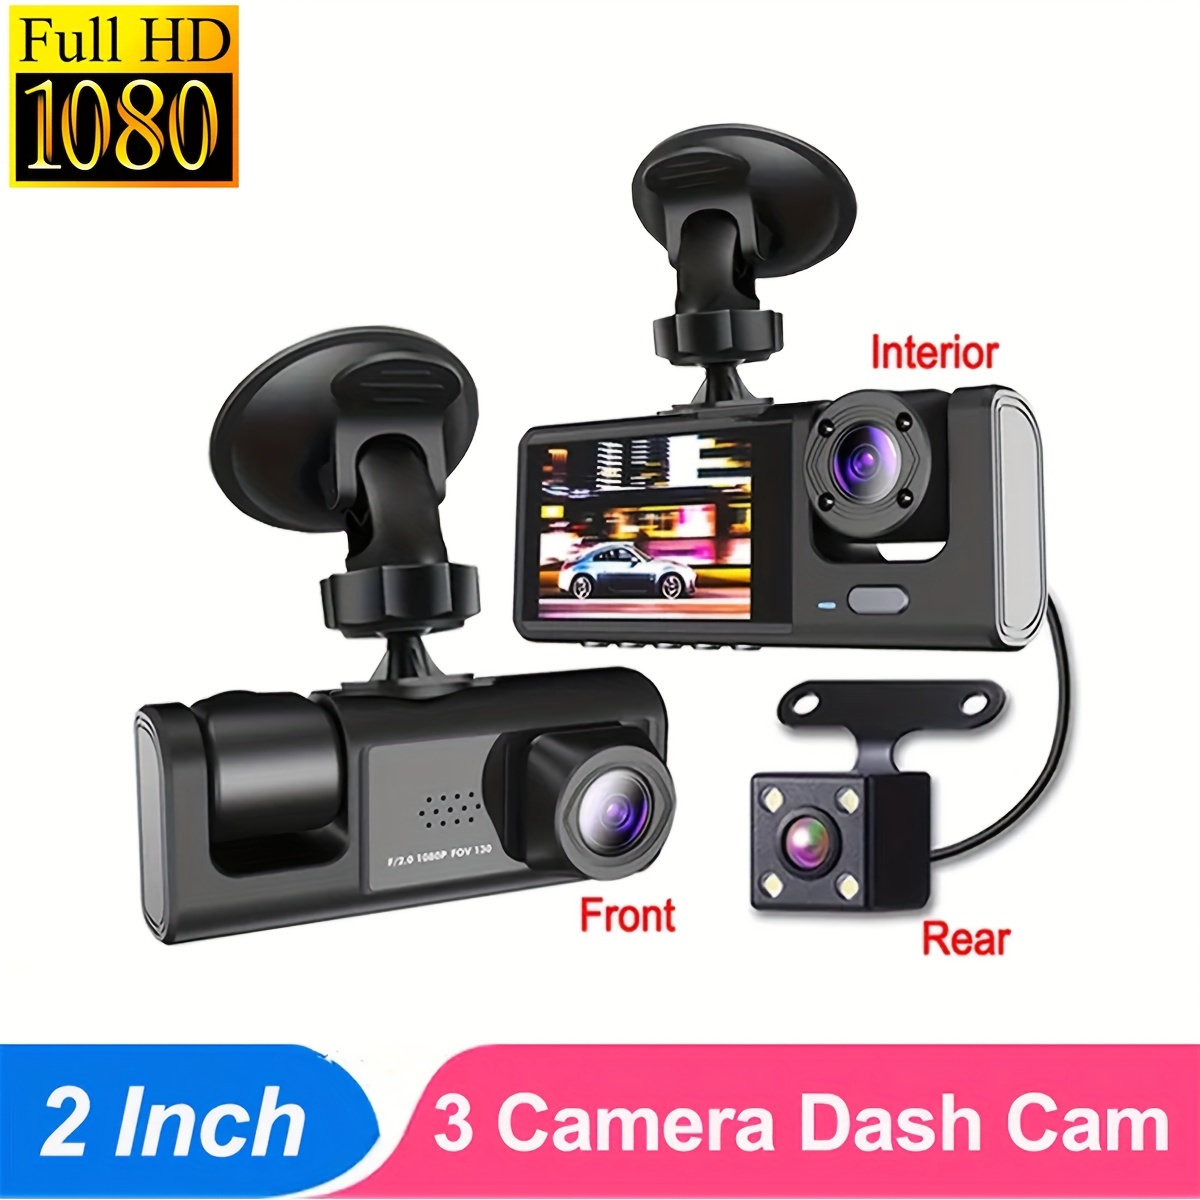 Dash Cam Front With 32g SD Card Boogiio 1080p FHD Car Driving Recorder 3''  IPS for sale online